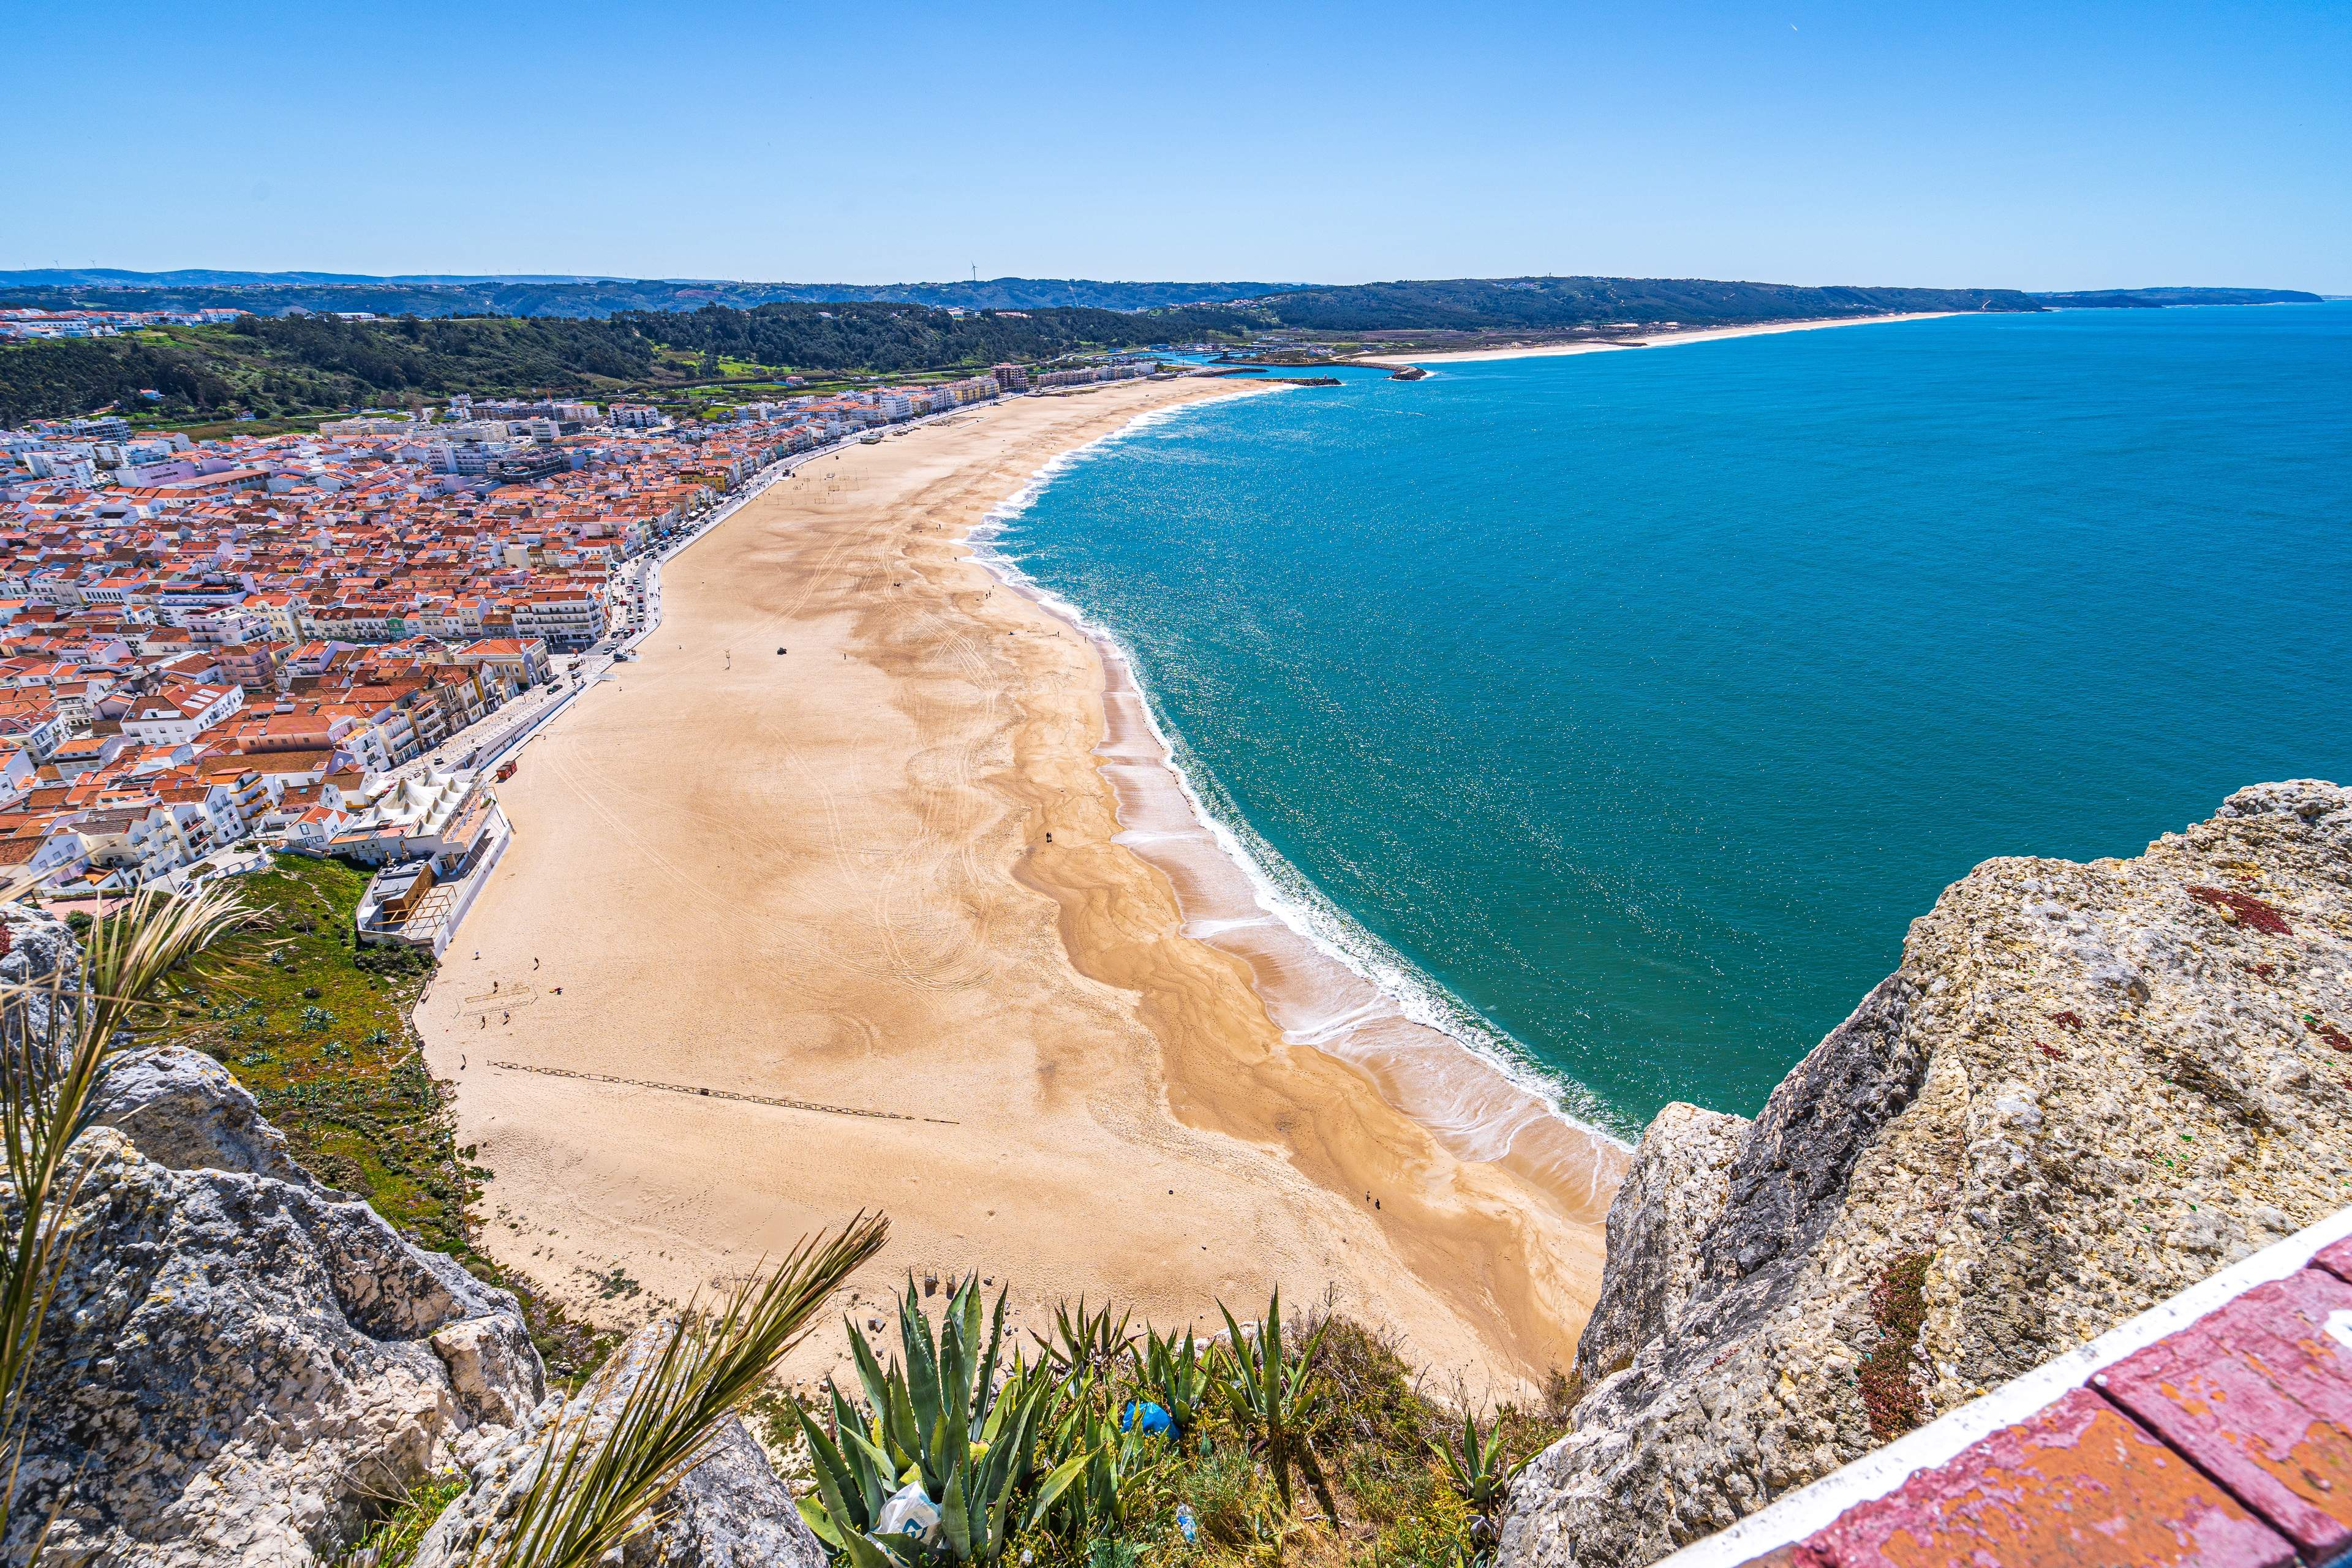 This is Nazaré, Portugal seen from Miradouro do Suberco